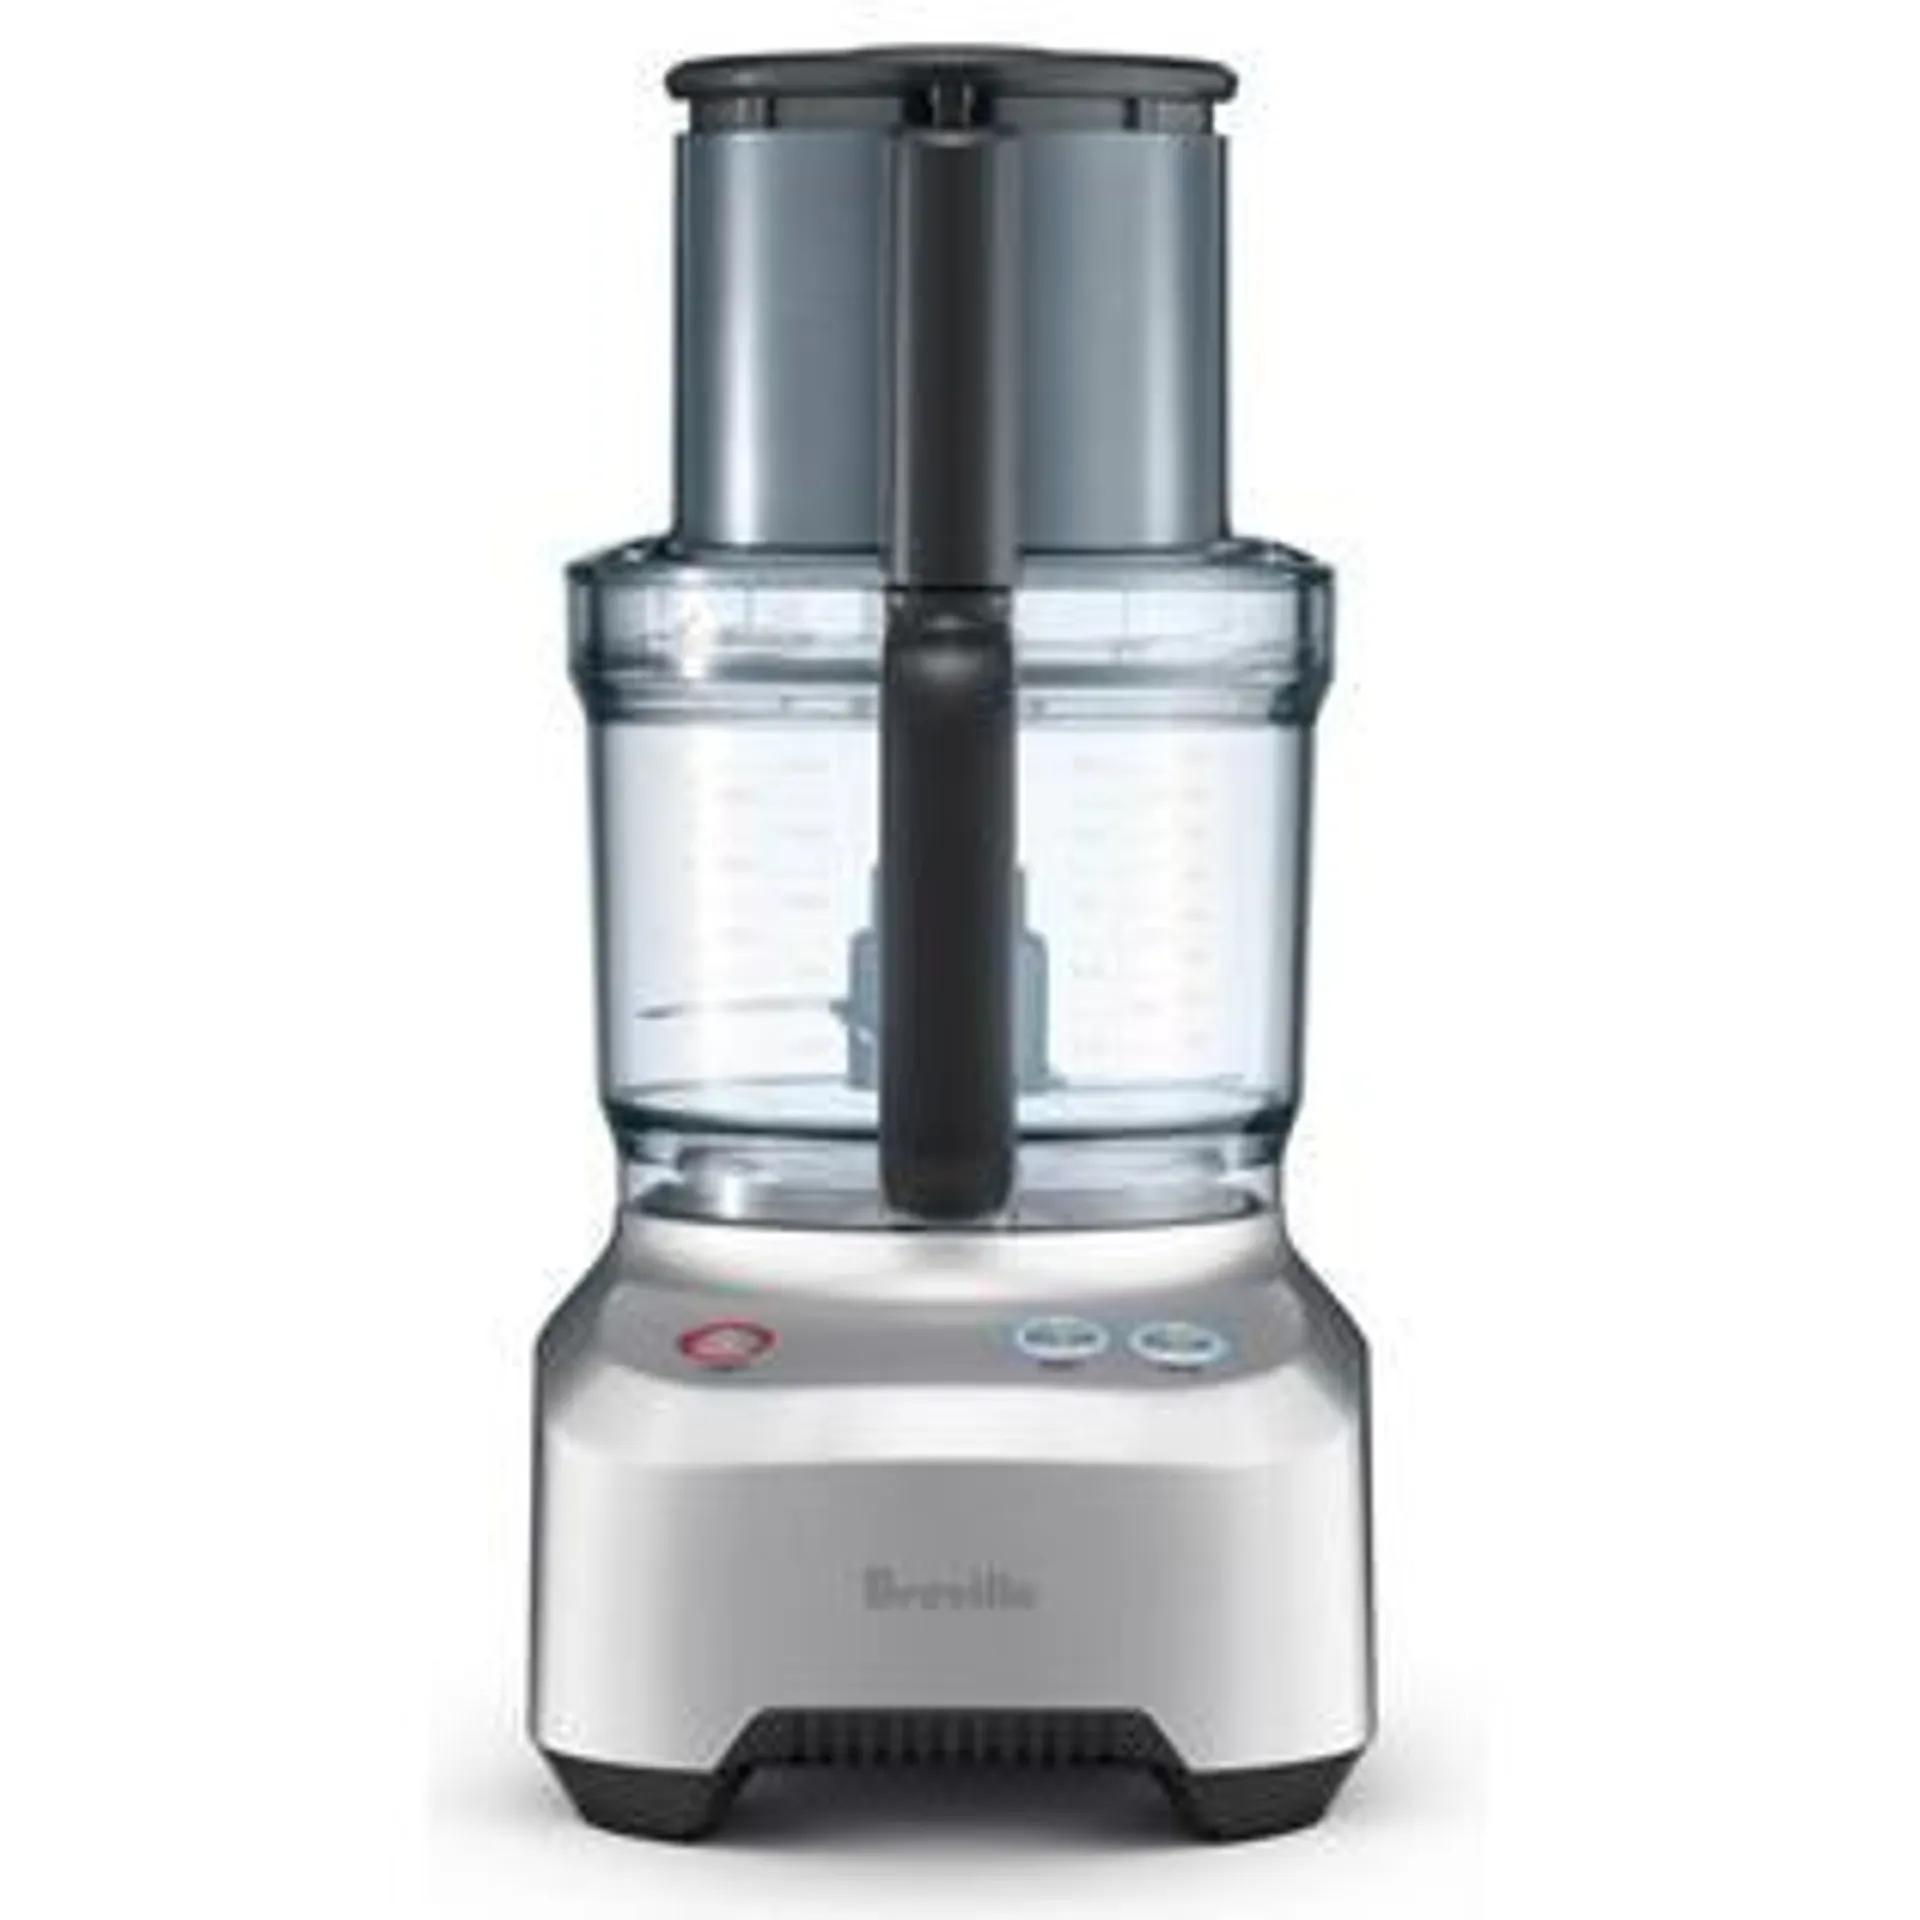 Breville BFP660SIL Sous Chef 12-Cup Food Processor, Silver